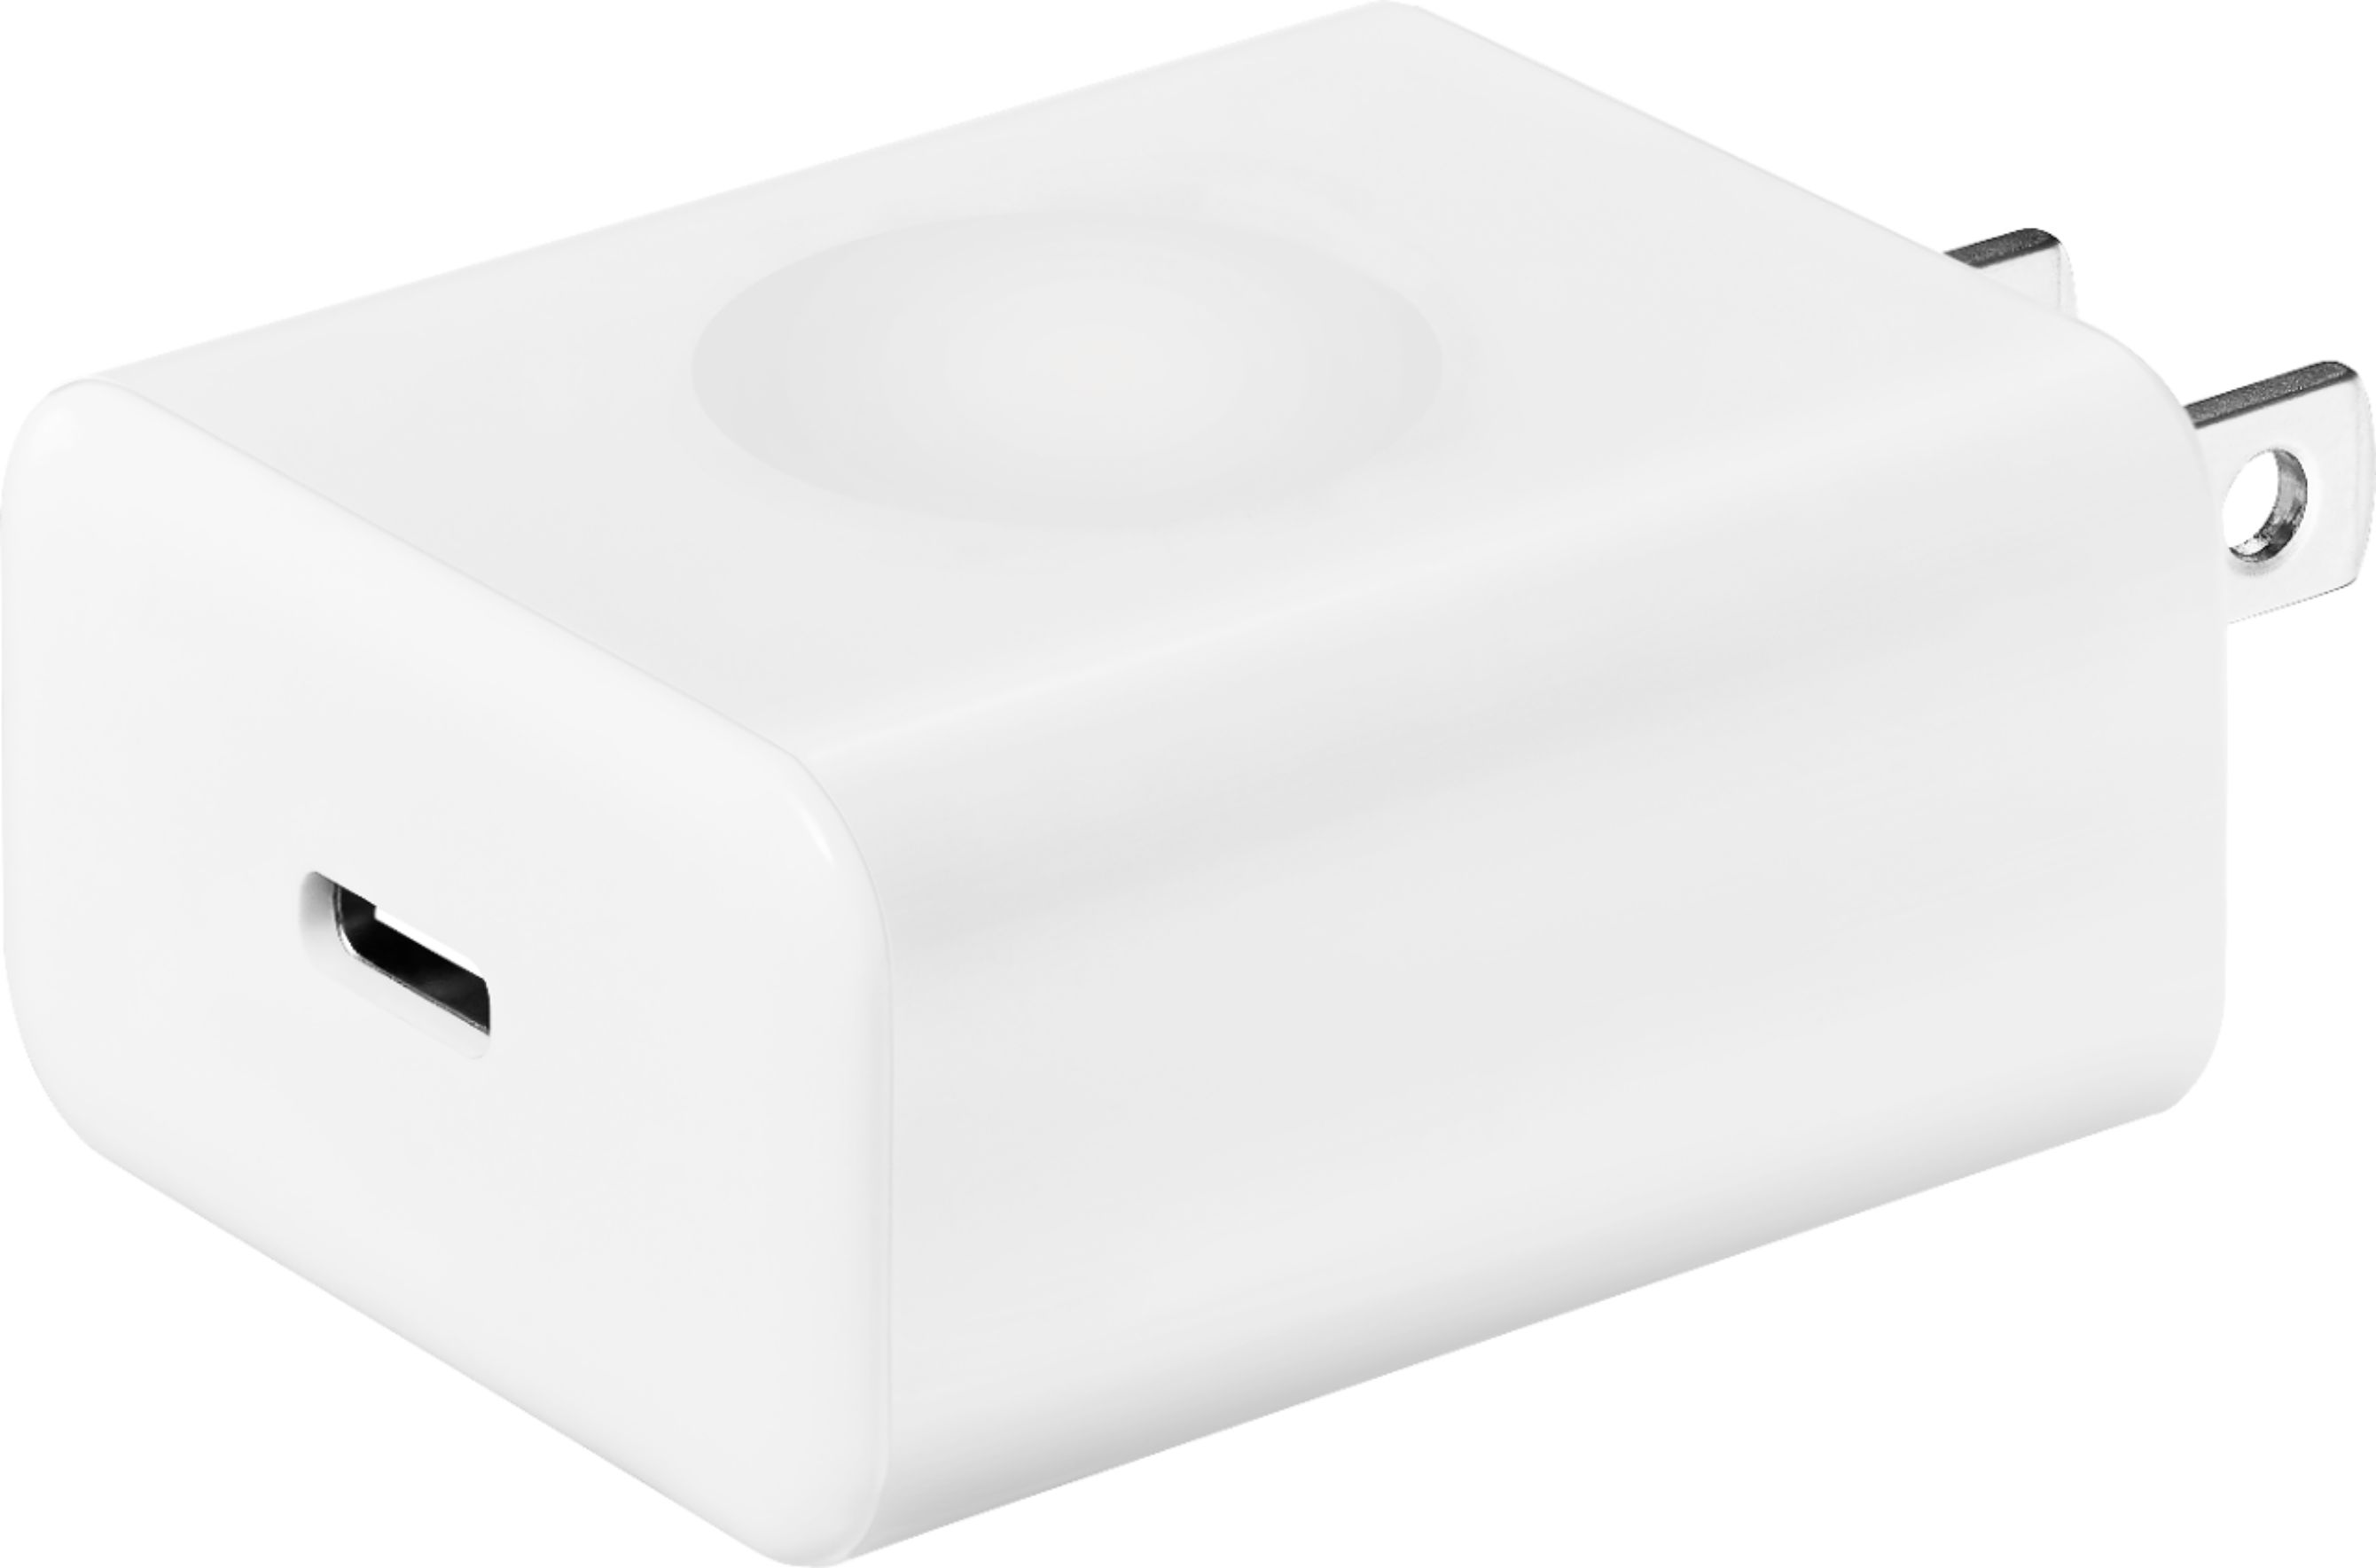 Anker USB Wall Charger White A2142J22 - Best Buy